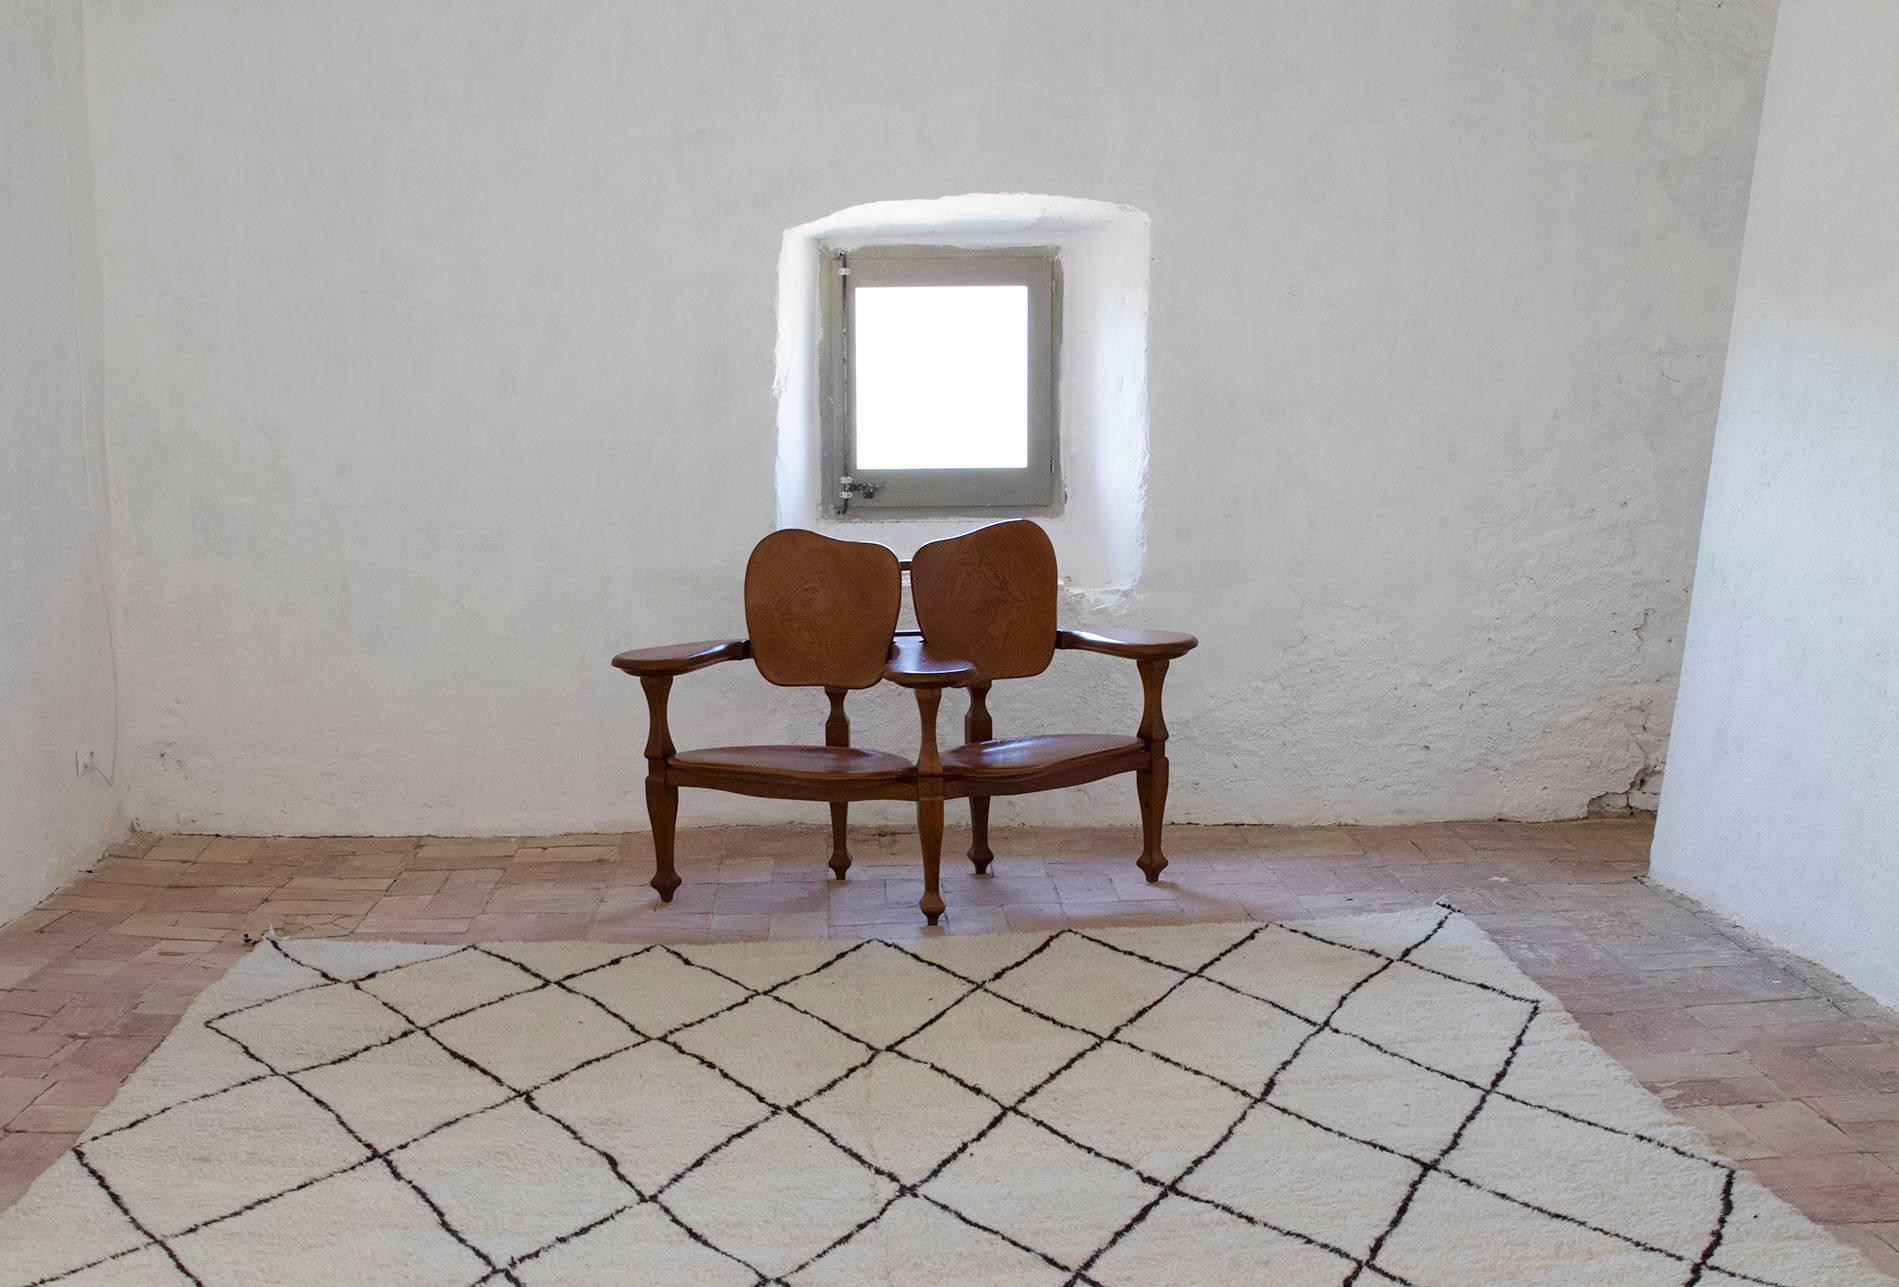 Bench designed by Antoni Gaudí for Casa Batlló.
Manufactured by BD Barcelona in 21st century, Spain.
Composed of several different parts fitted together. Its design, with a dividing armrest and two seats which face in different directions, gives